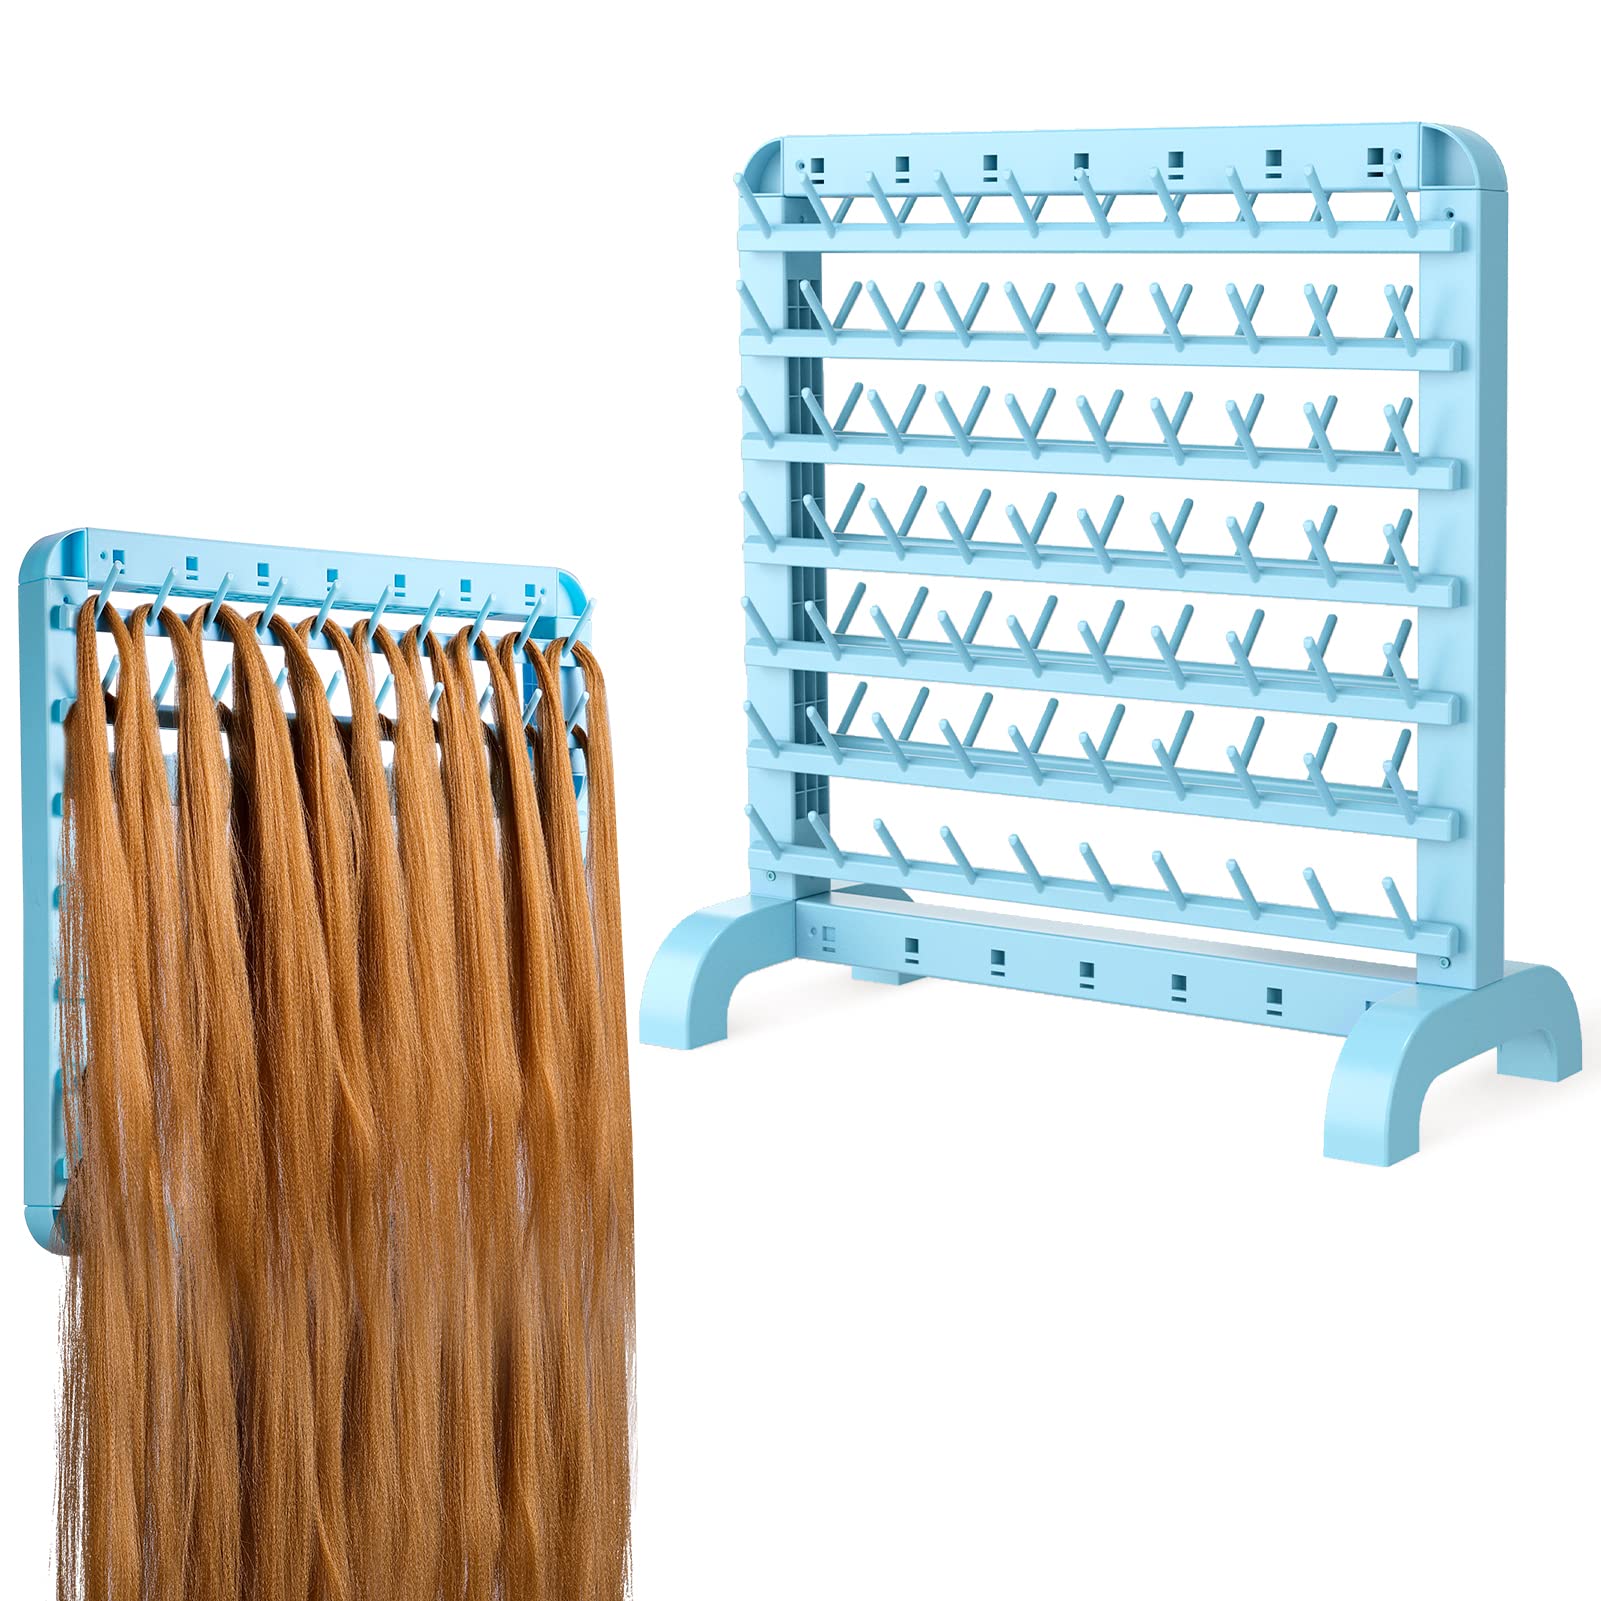 Braid Rack Braiding Hair Stand Organizer Standing Or Wall Mounted Pine Wood  Organizer With 120Spools Home Or Professional Salon - AliExpress